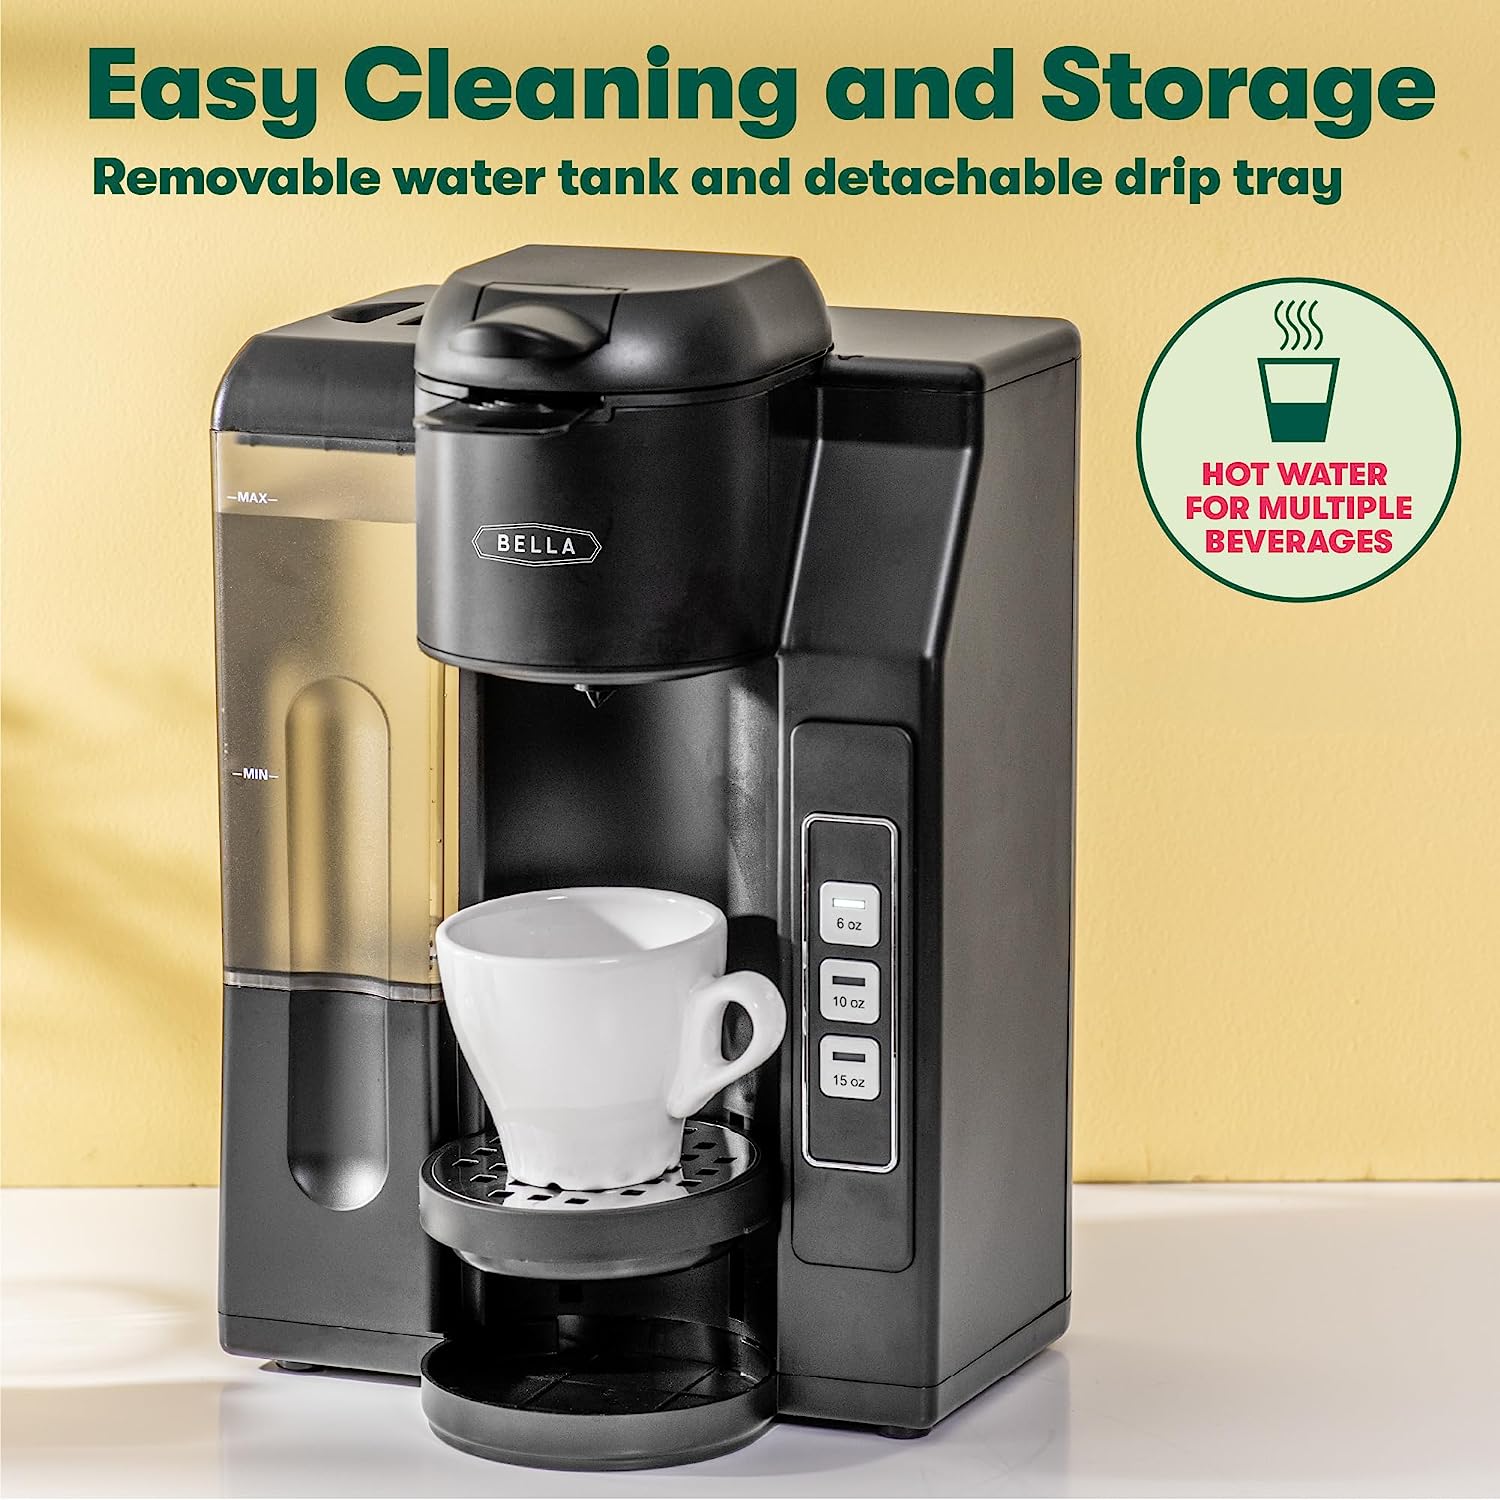 Best Coffee Maker With Removable Water Tank- See Details